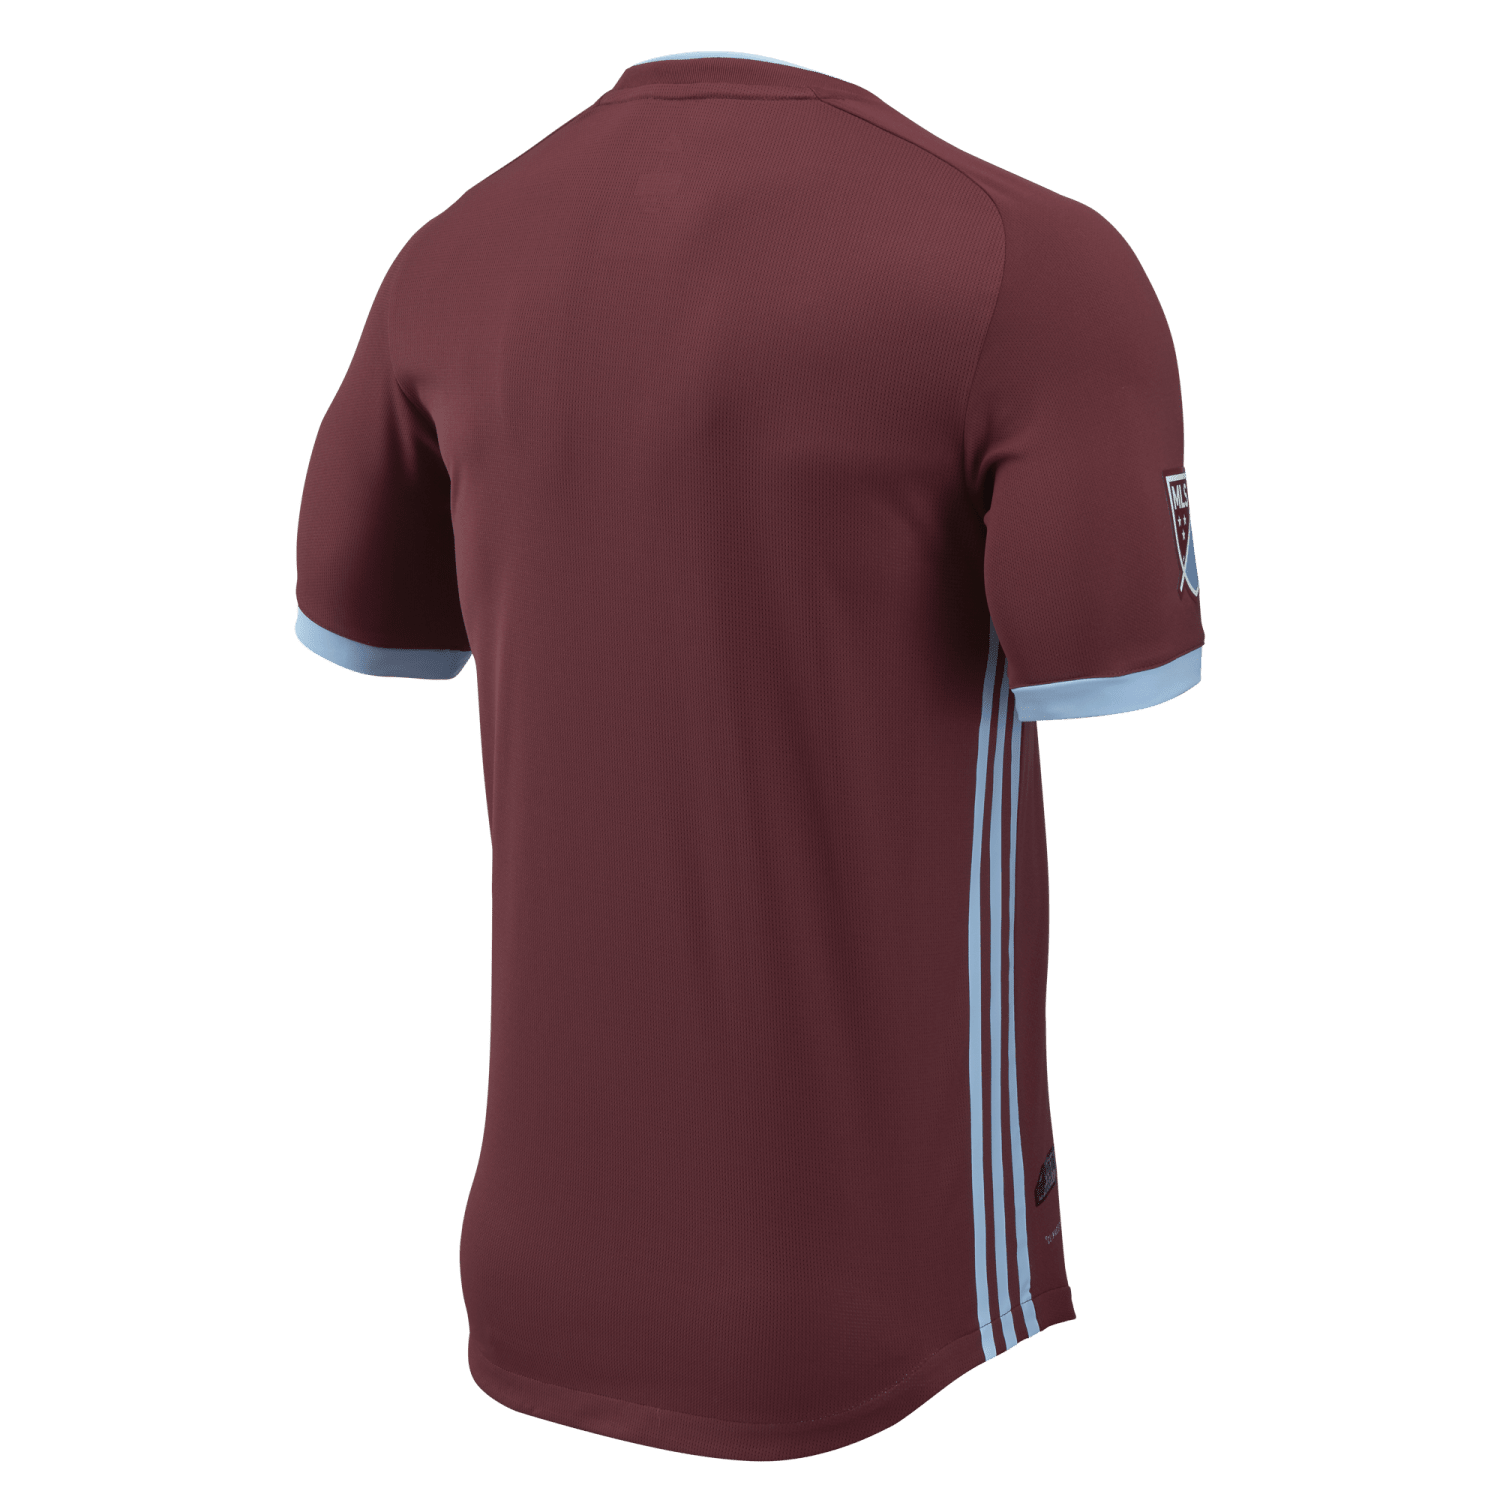 Opinions on MLS' new-for-2018 kits from the players who'll wear